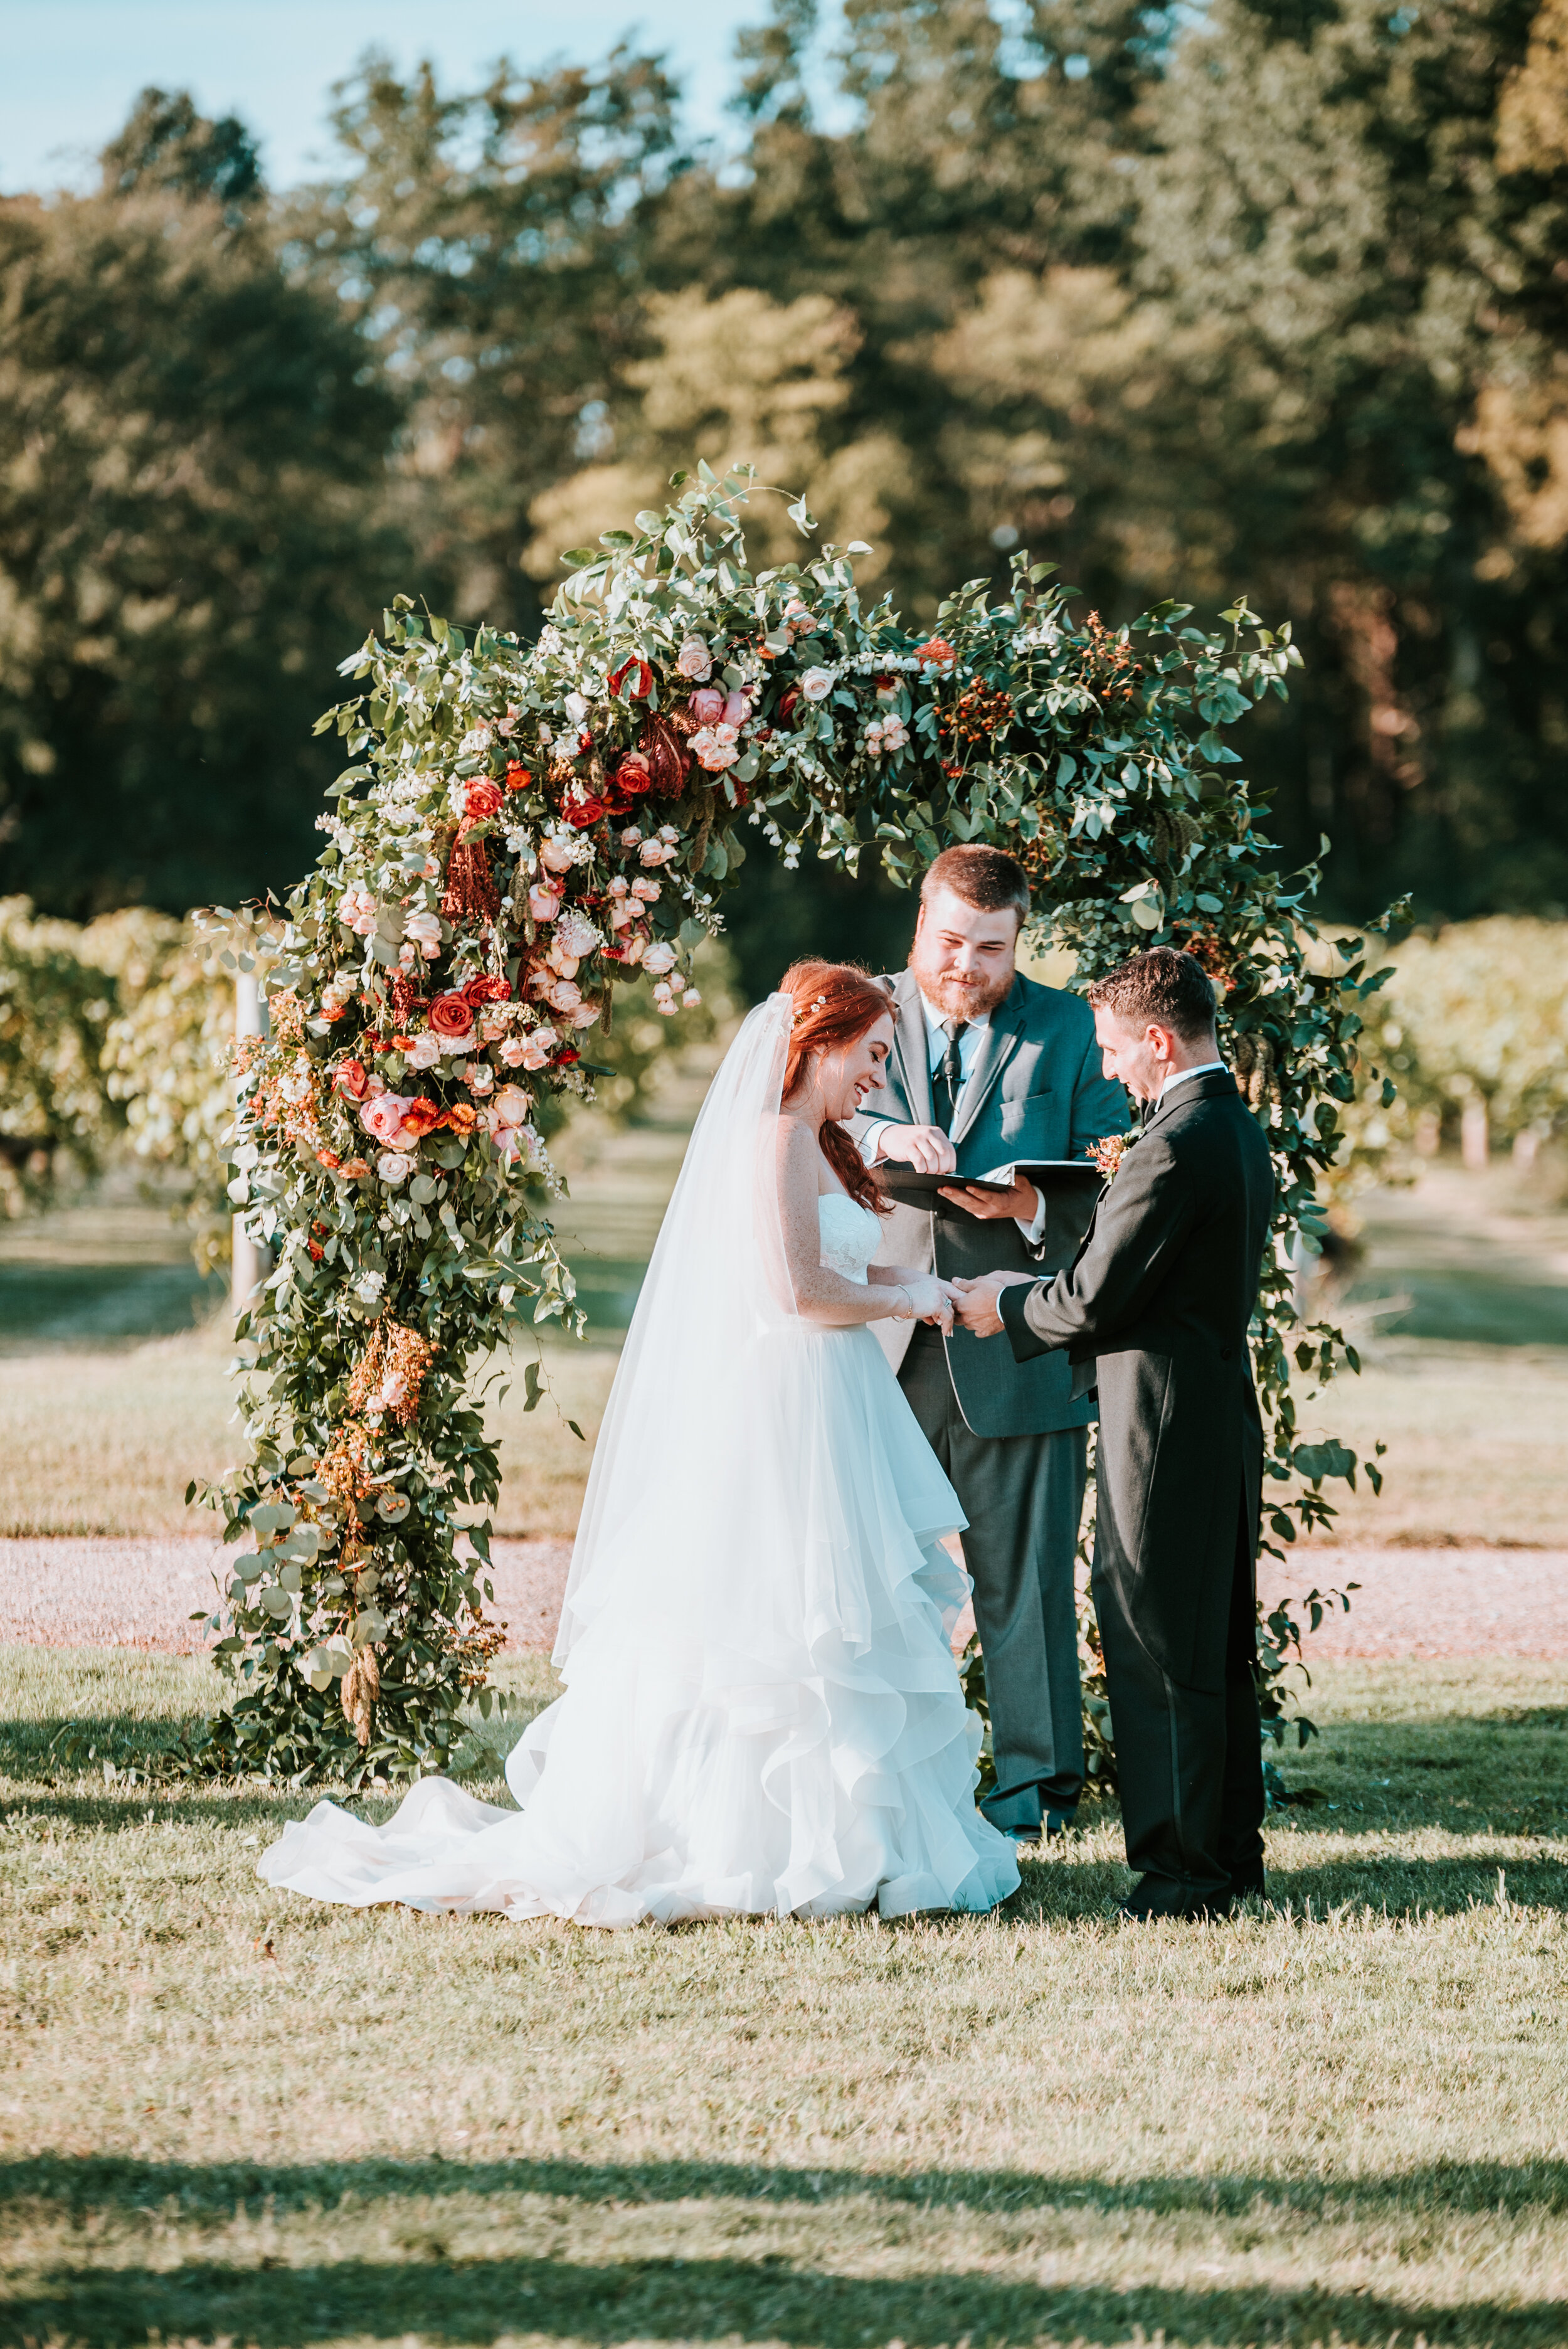 Lush floral arch for a fall wedding at Long Hollow Gardens with untamed greenery, berries, and rust orange garden roses.